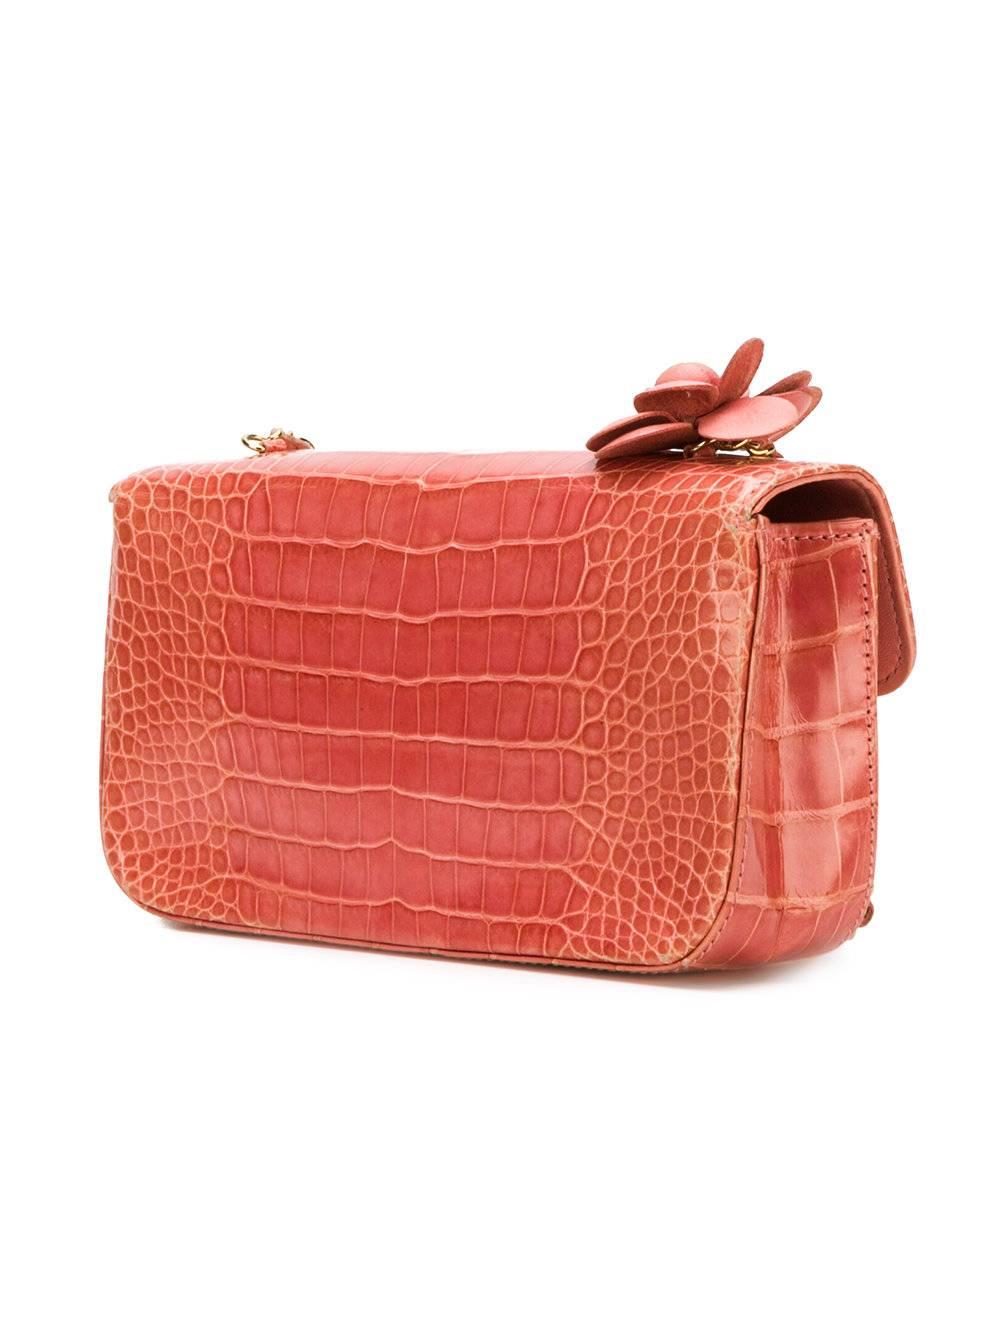 Pink calf leather rosette shoulder bag featuring a foldover top with magnetic closure, a main internal compartment and a chain link strap. 

Colour: Pink

Composition: Crocodile leather

One Size

Condition: 8/10
